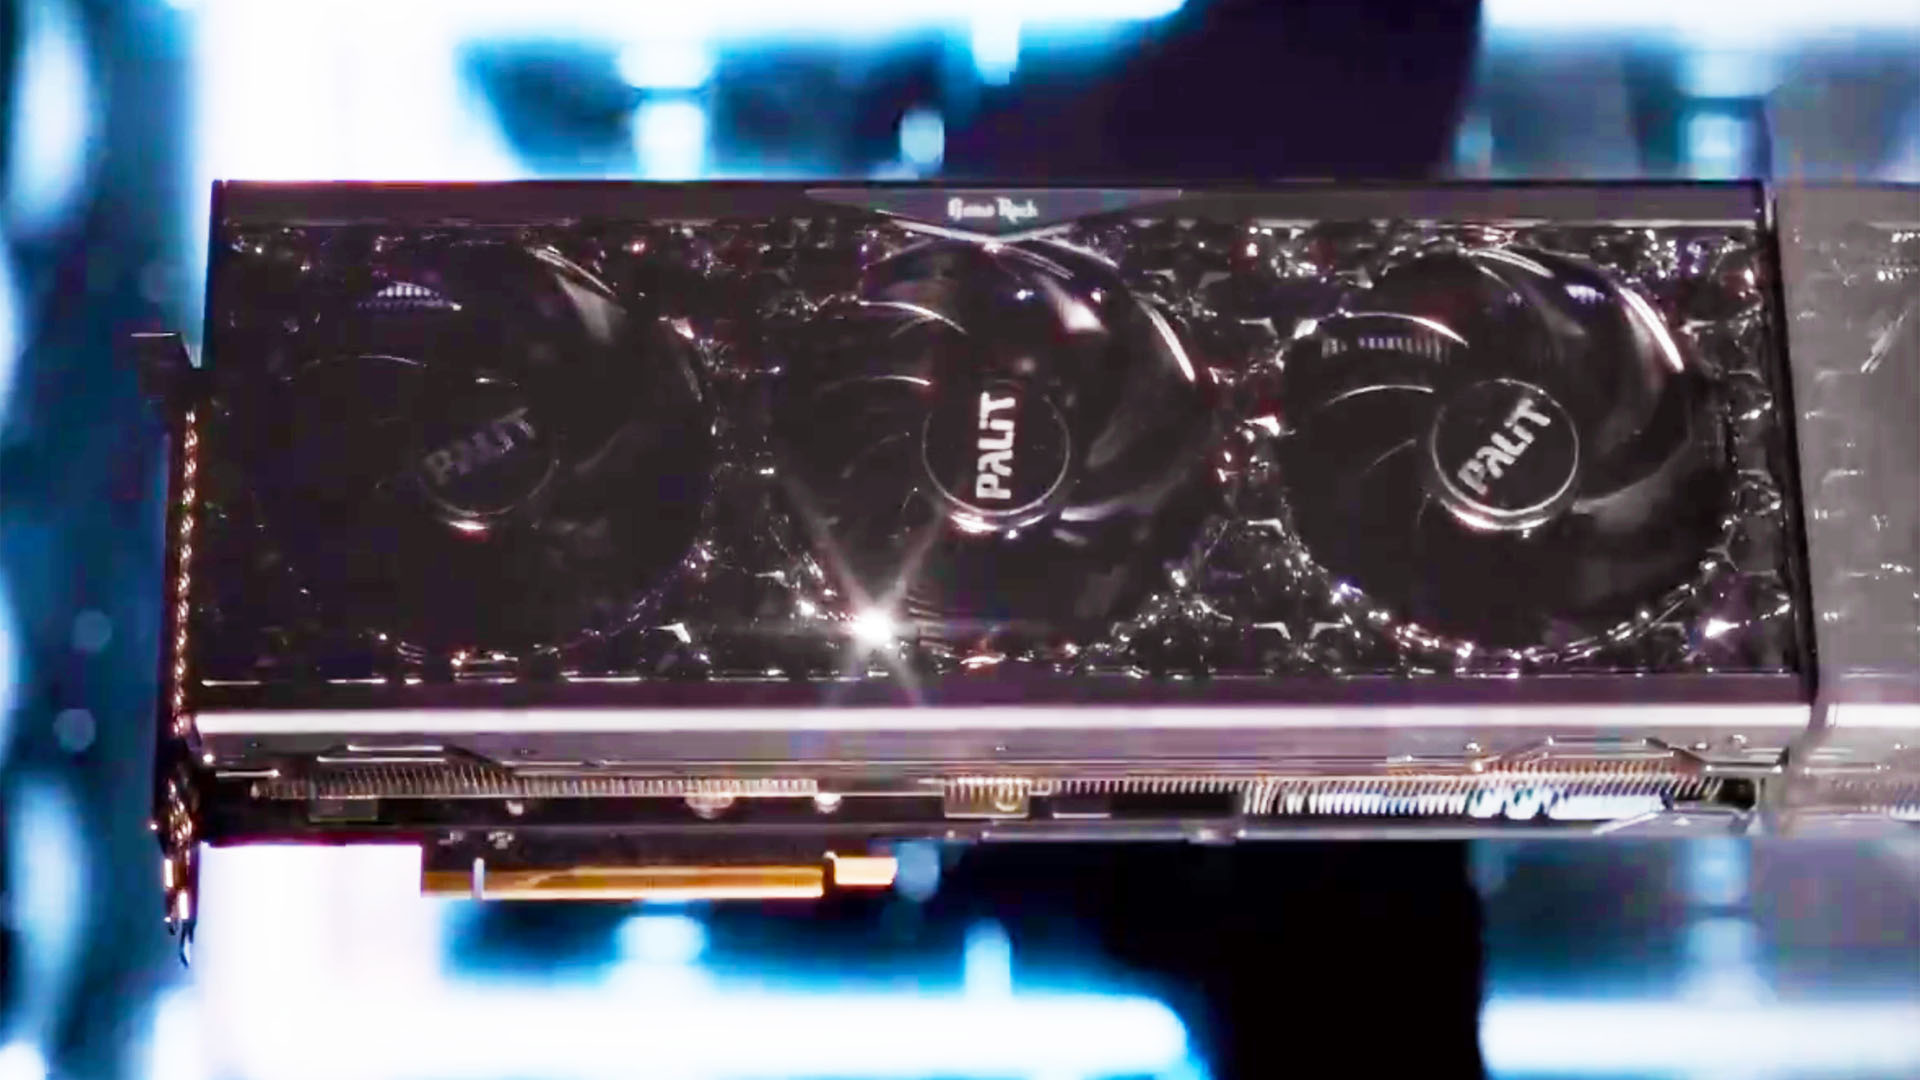 This new Nvidia graphics card could change GPU cooling forever